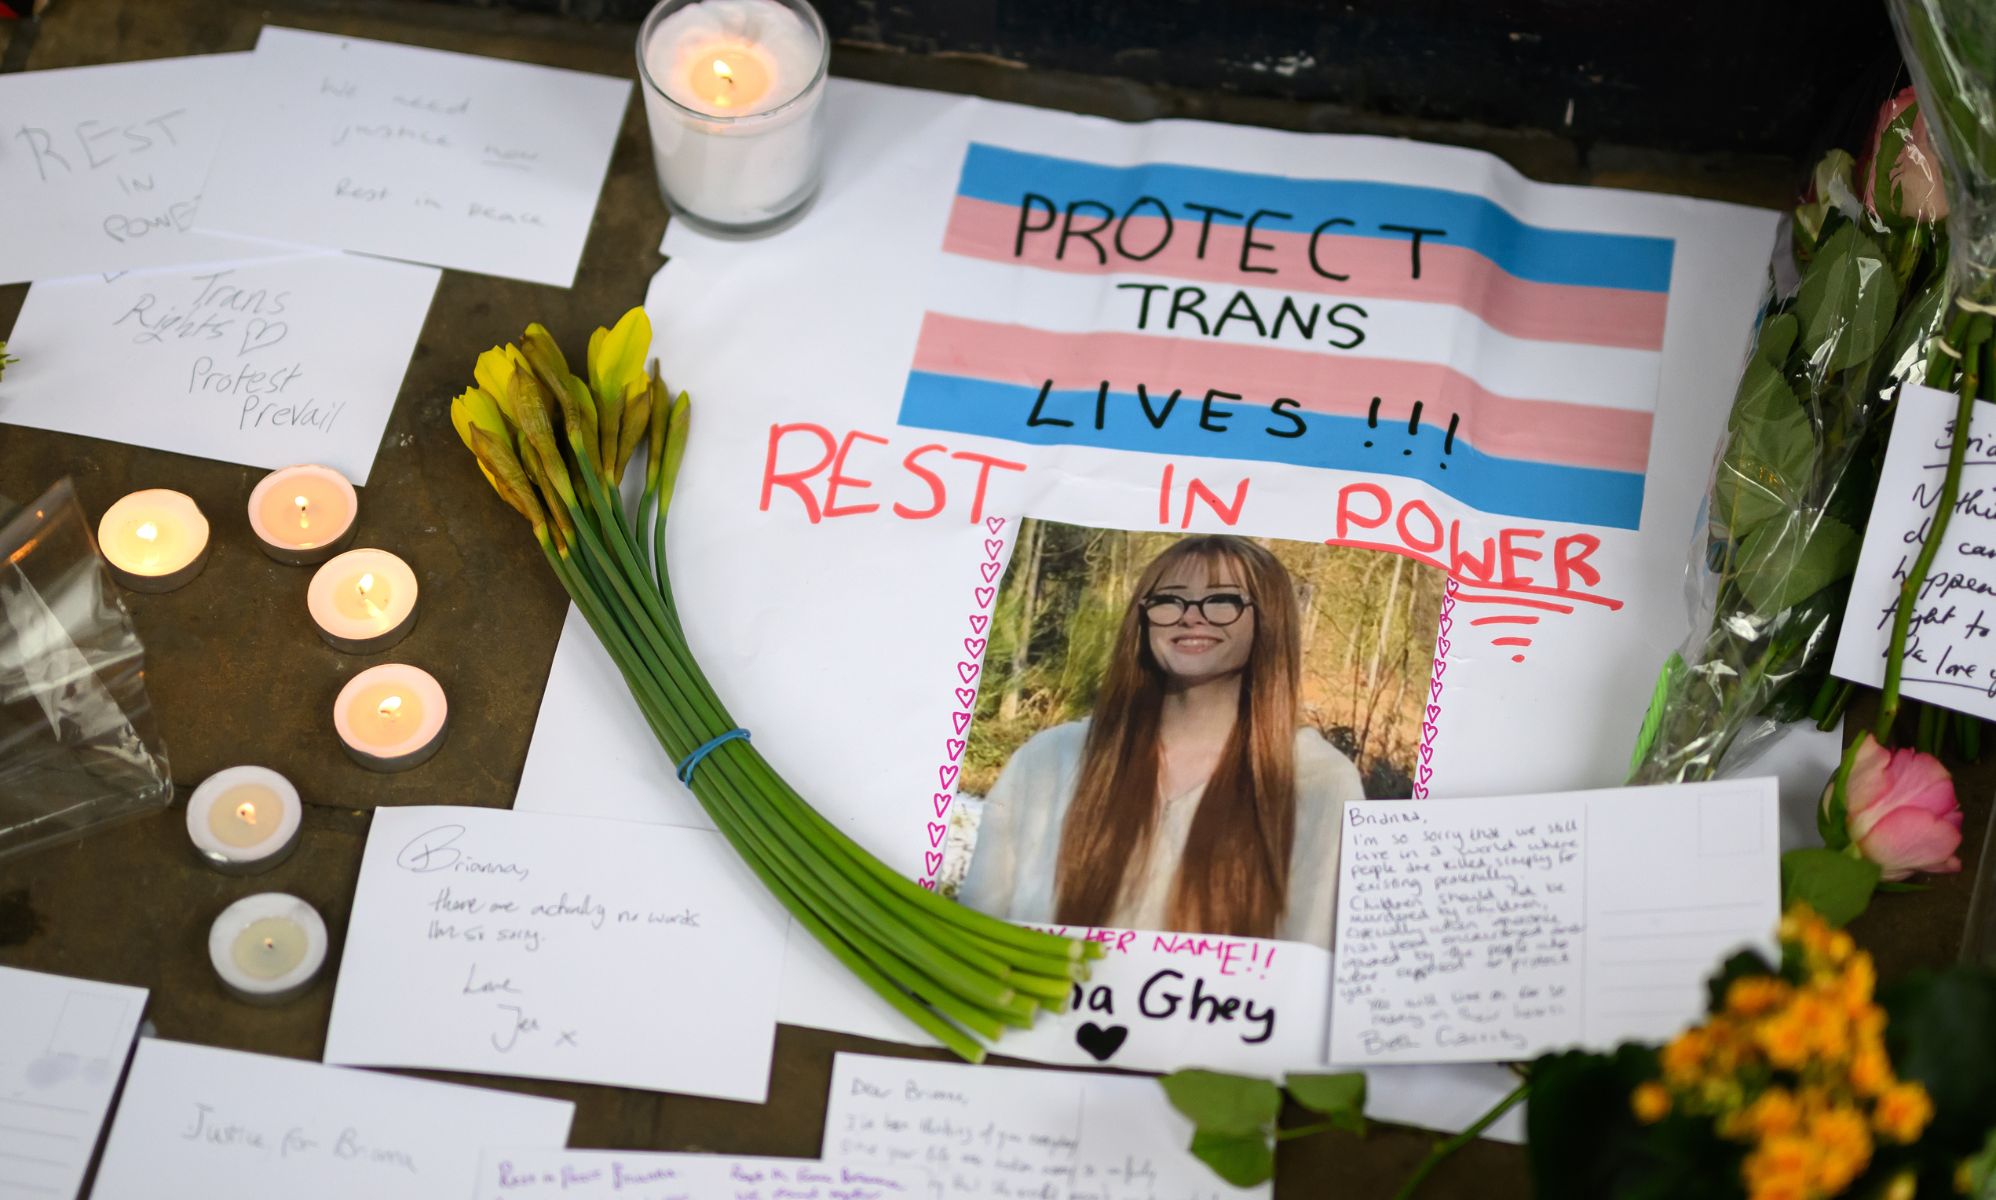 Brianna Ghey suspect pleads not guilty to murder of trans girl | ELC Ltd